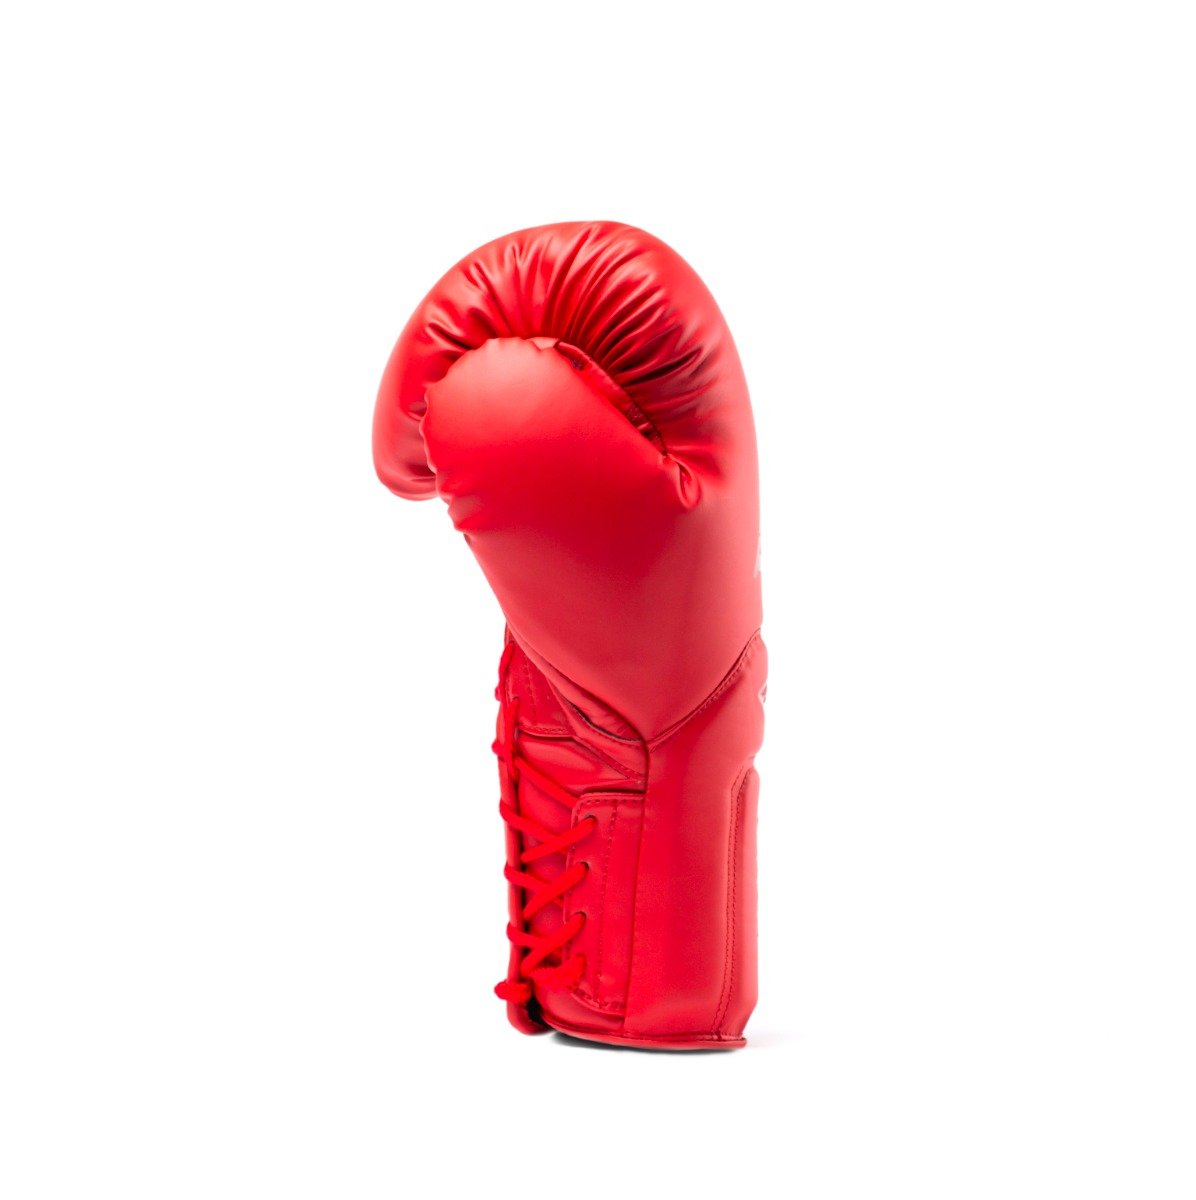 Elite 2 Laced Pro Boxing Gloves